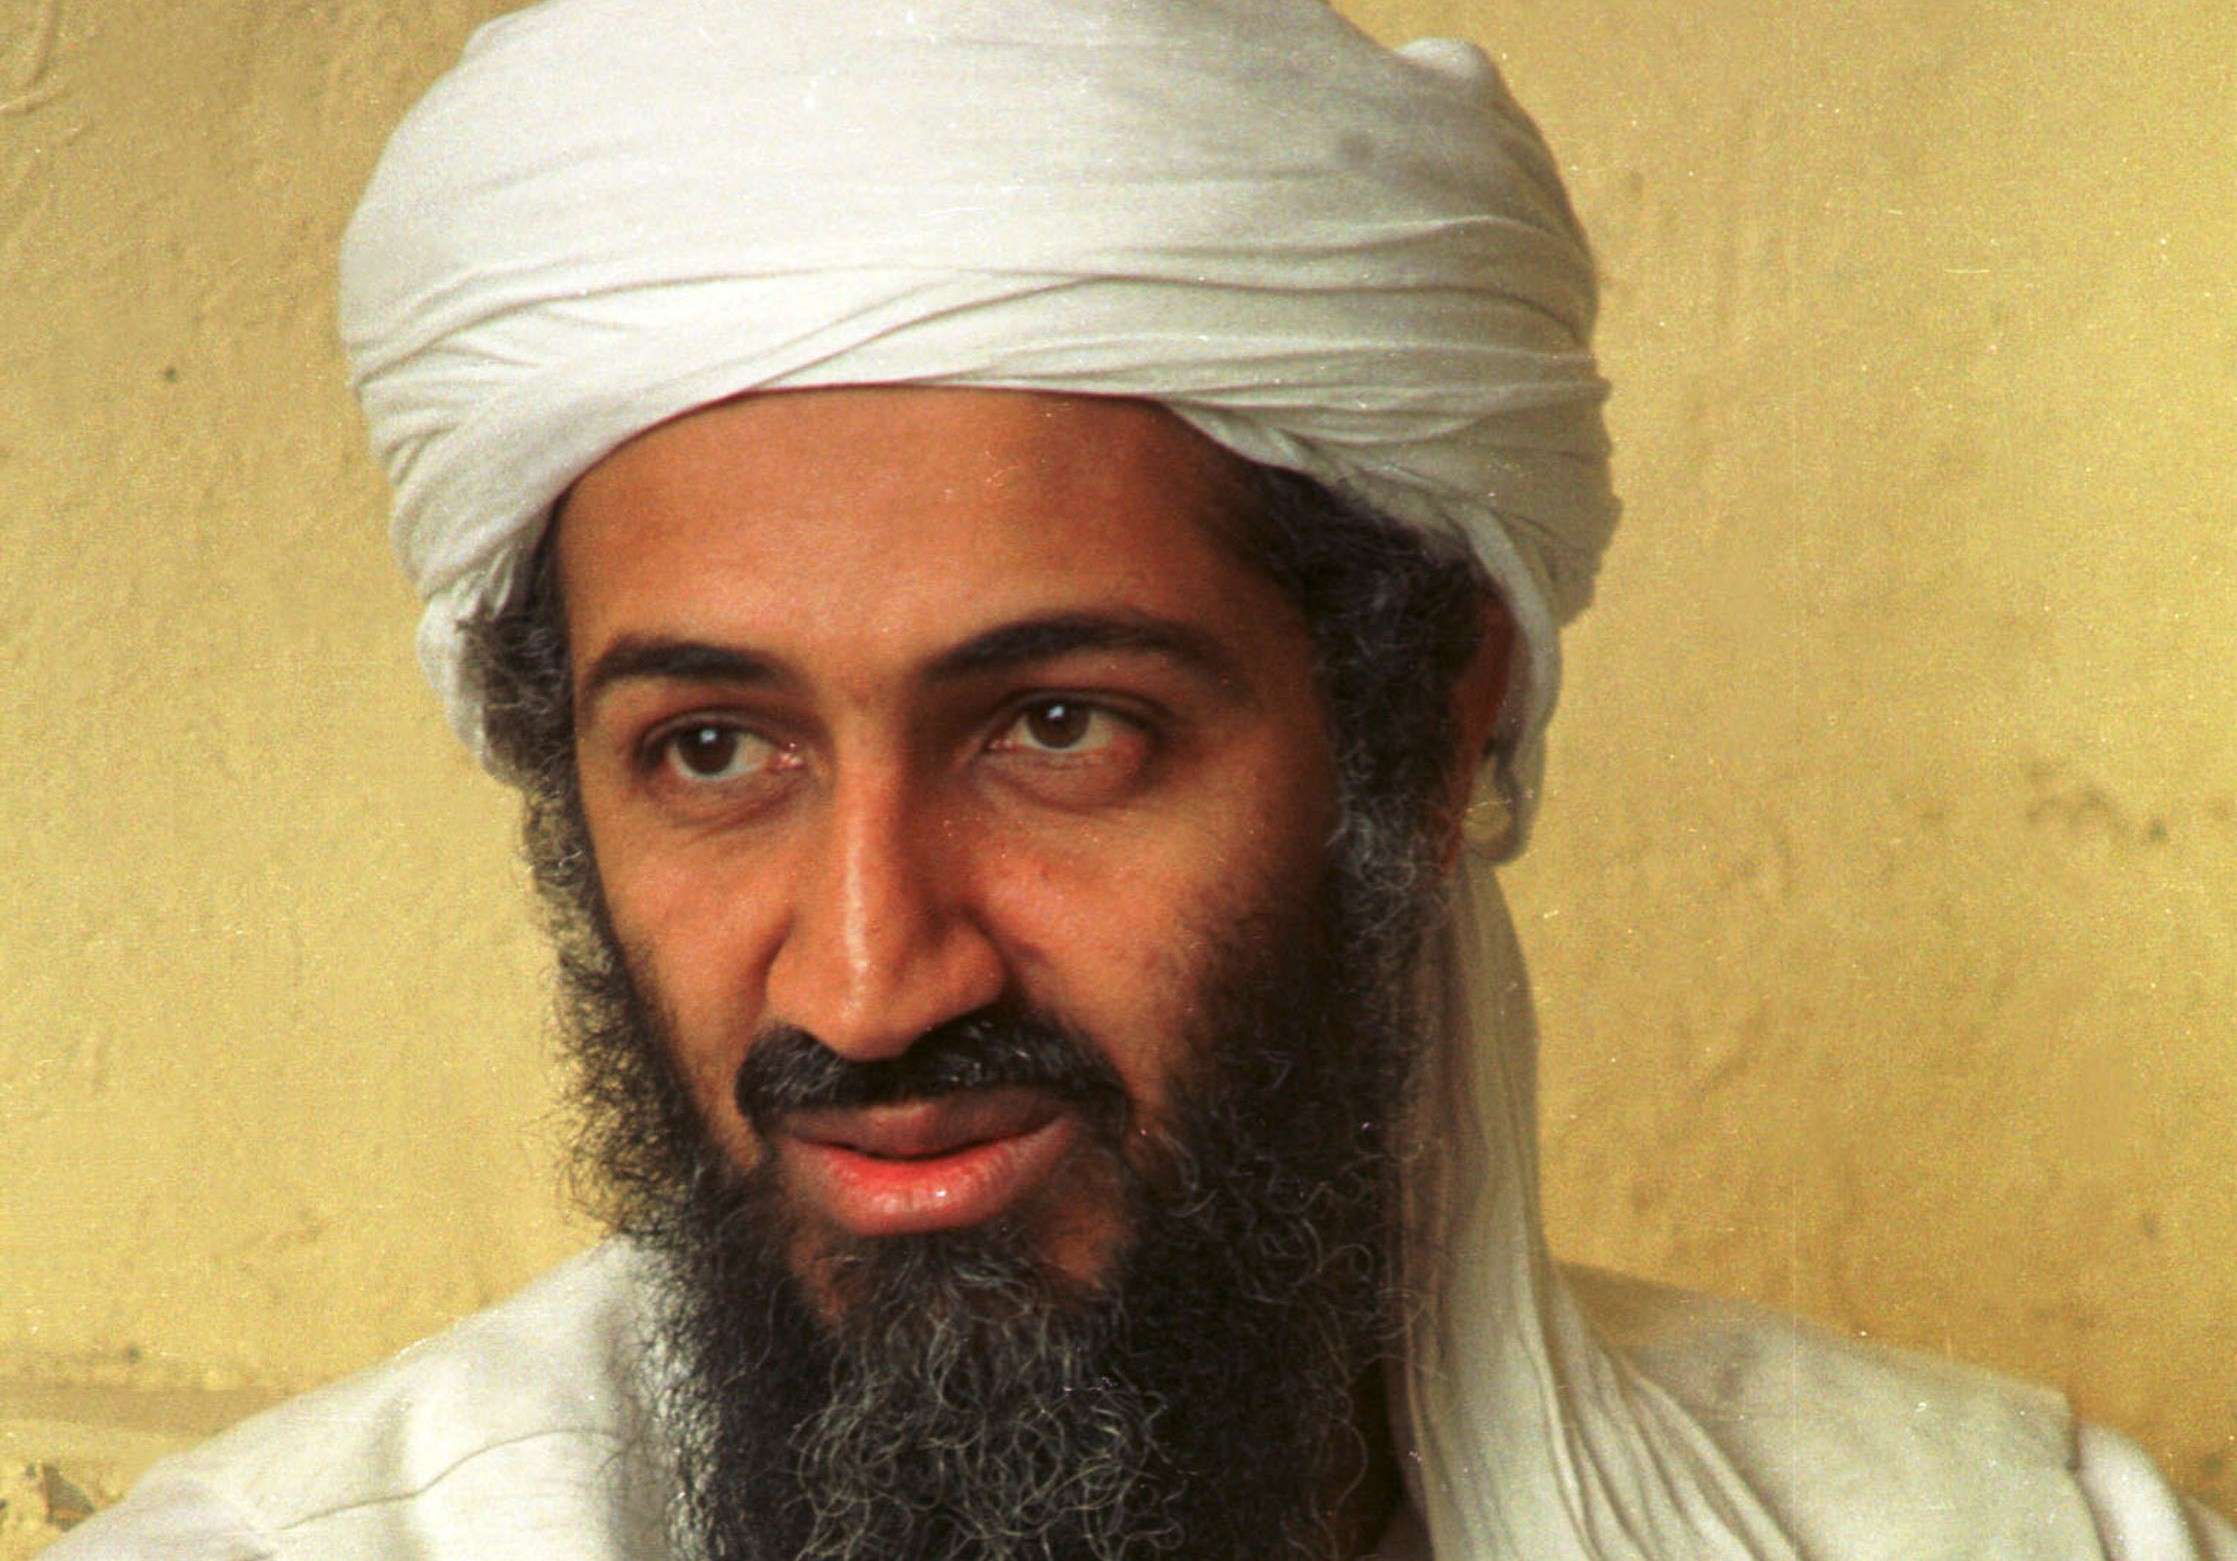 395617 01: (FILE PHOTO) Saudi dissident Osama bin Laden in an undated photo. October 10, 2001. Afghanistan's ruling Taliban lifted restrictions on Bin Laden, giving him permission to conduct "Jihad," or holy war, against Afghanistan's enemies. (Photo by Getty Images)